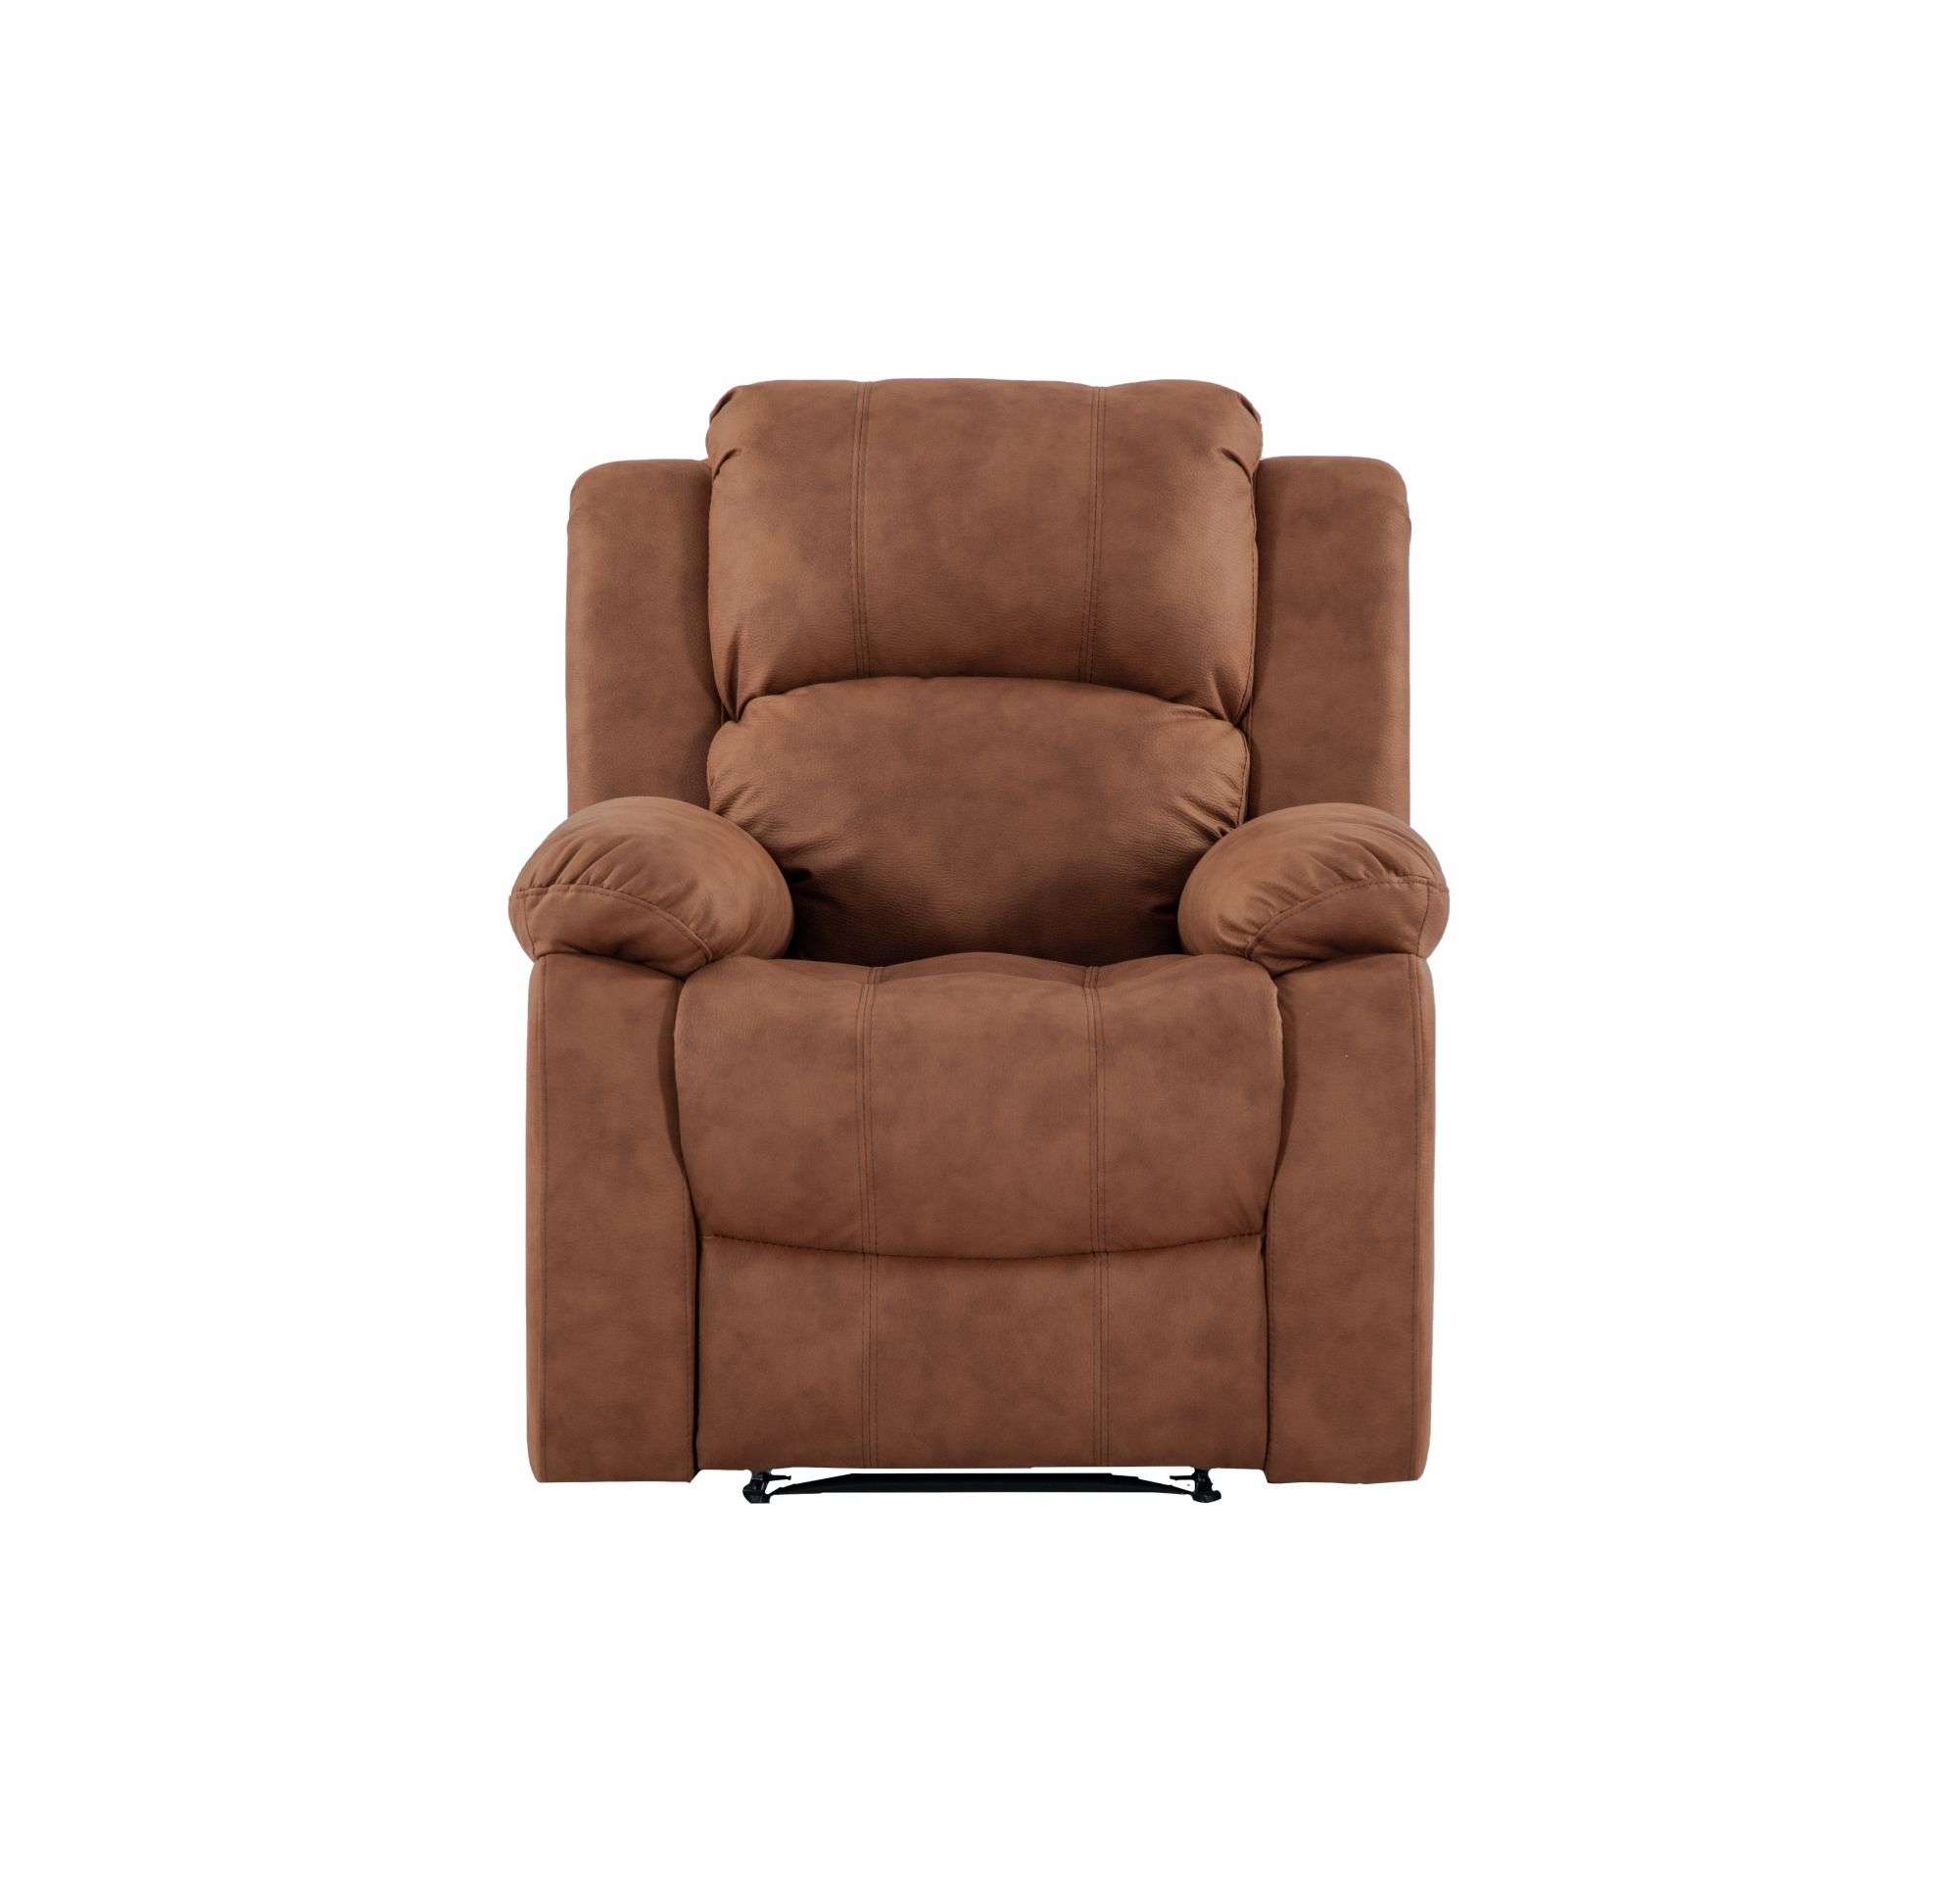 SBK001R-Blake Sofa 1 Seater With Recliner-NZ02